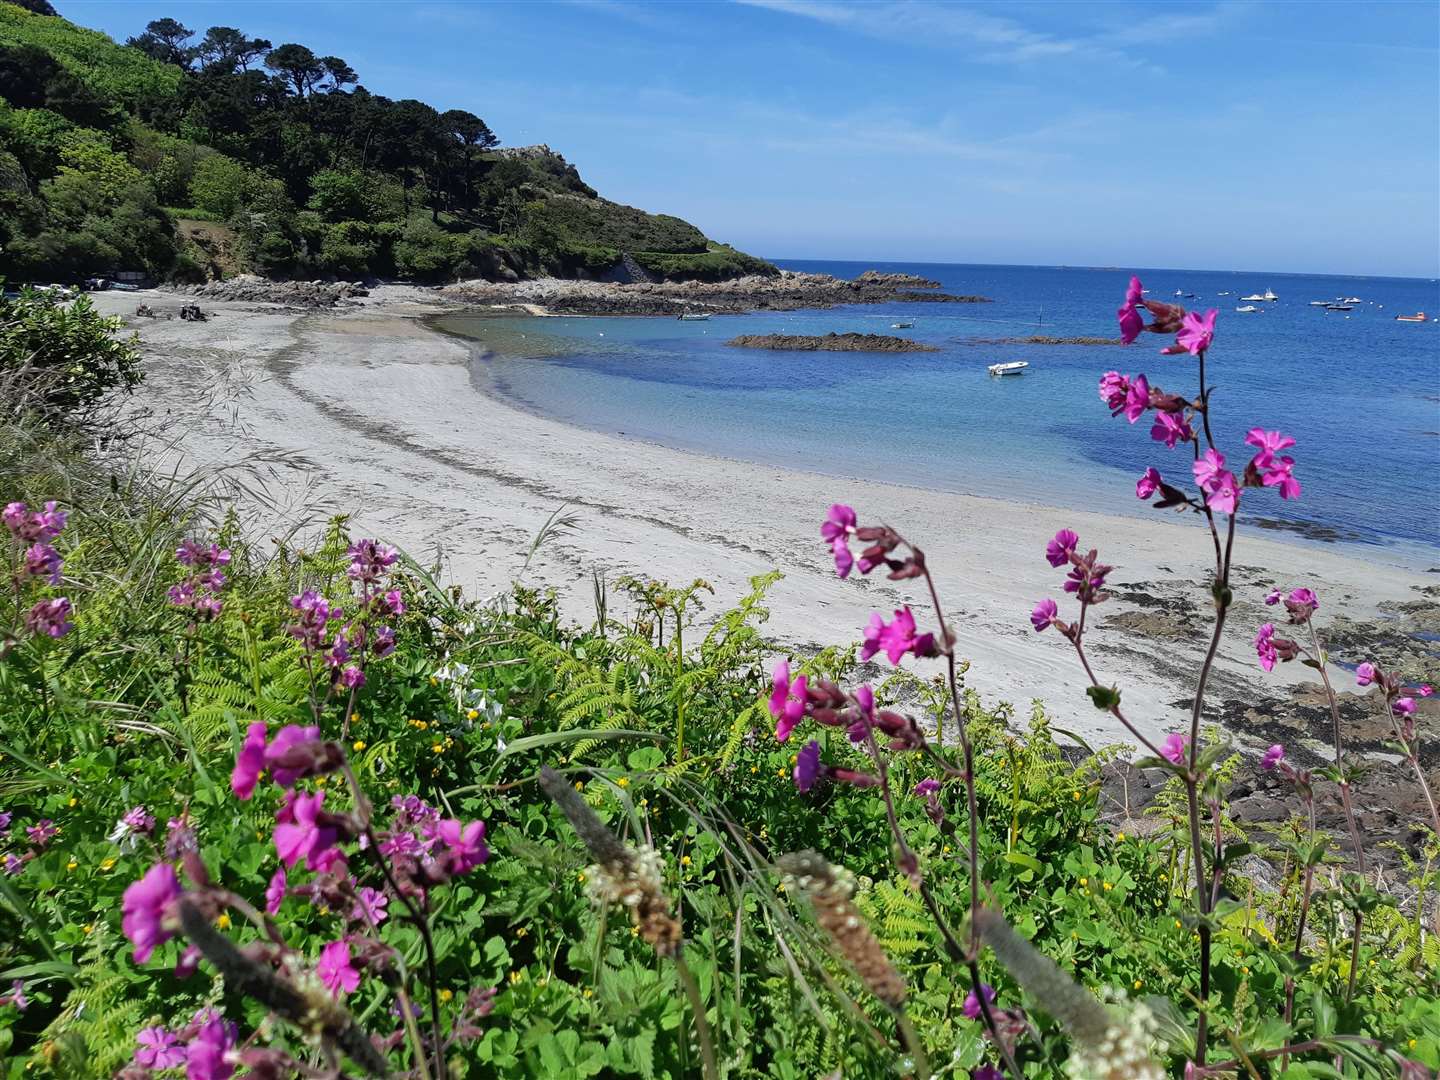 One of the beaches in Guernsey (12430511)